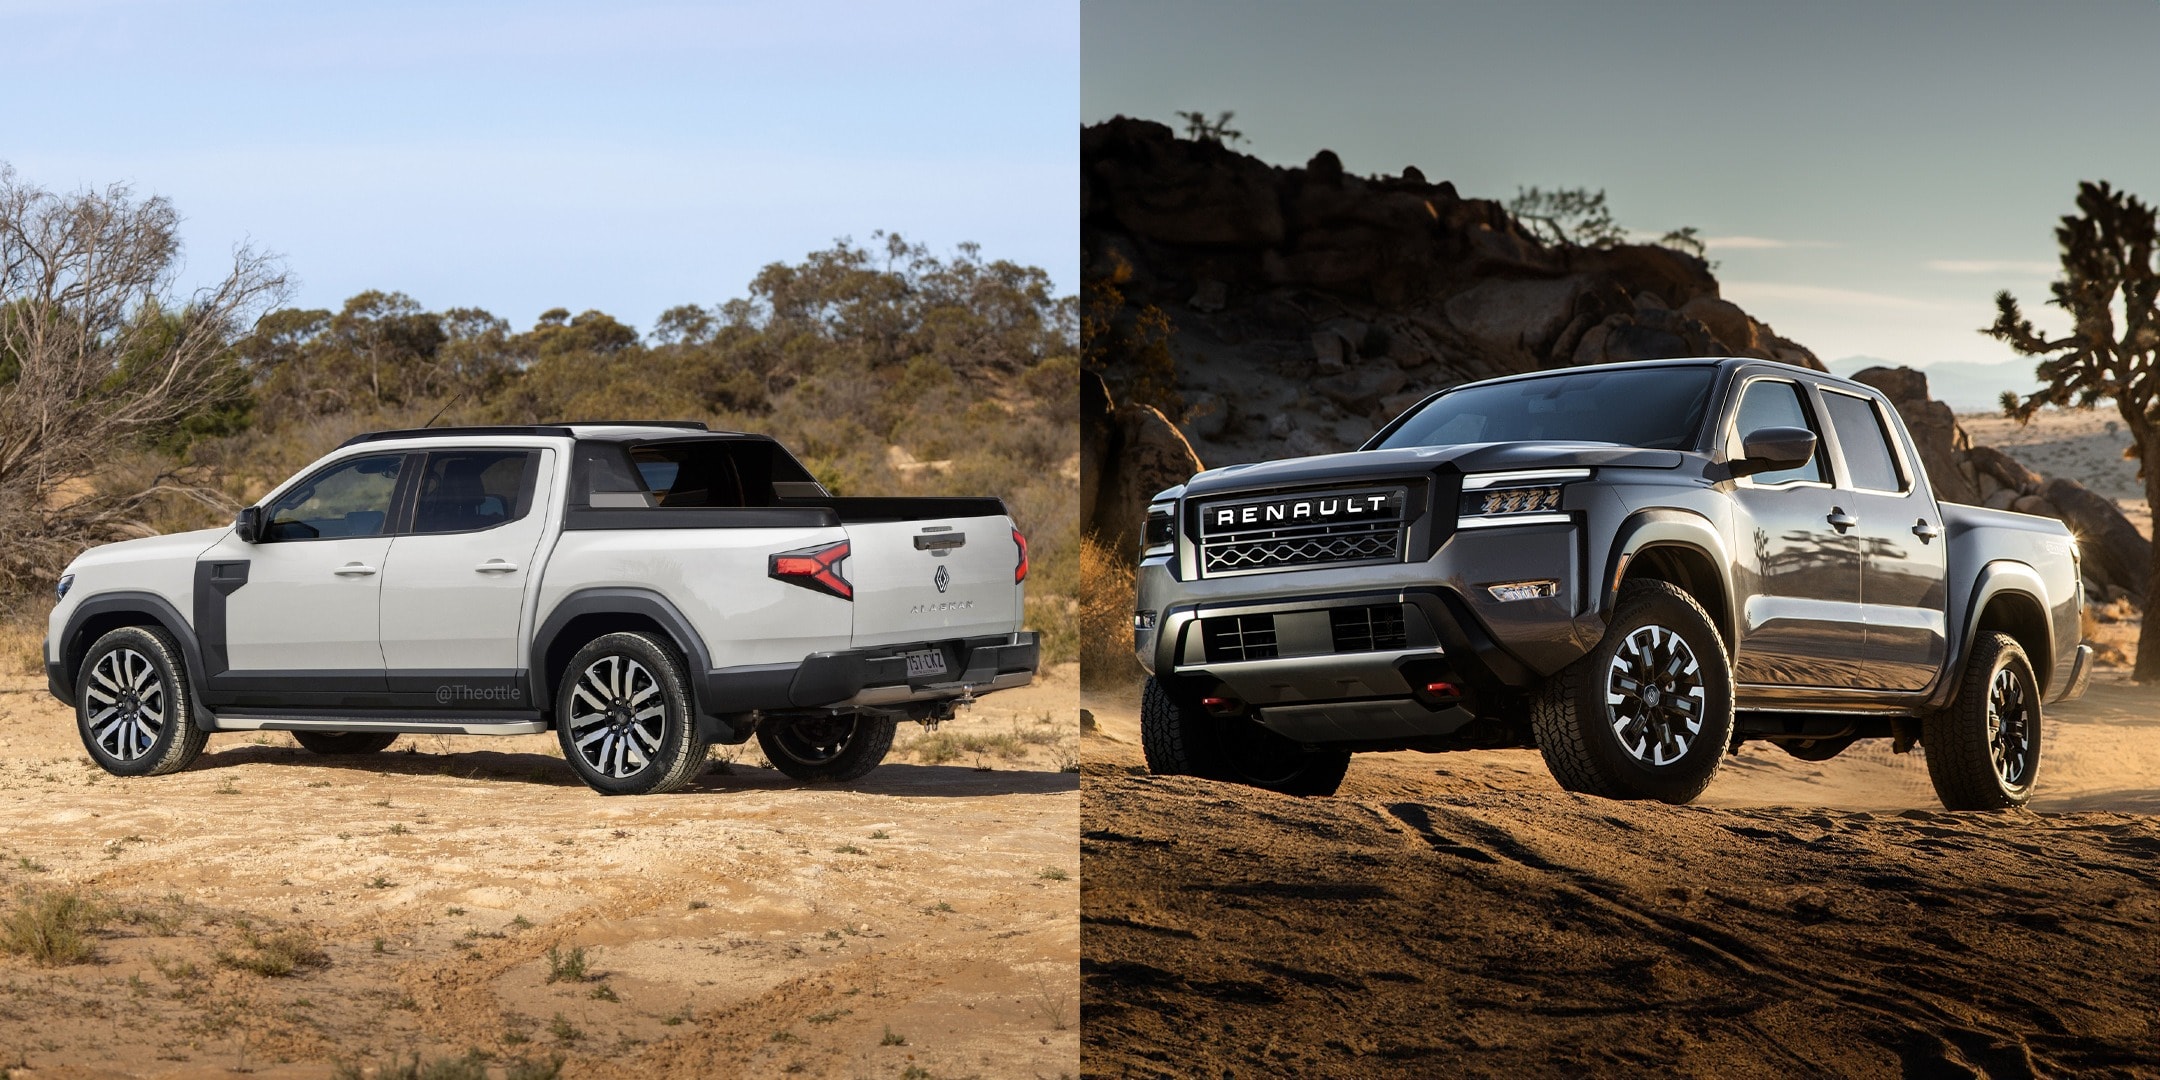 What If the Second-Gen Renault Alaskan Was a Rebadged Nissan Frontier or a Duster Truck?